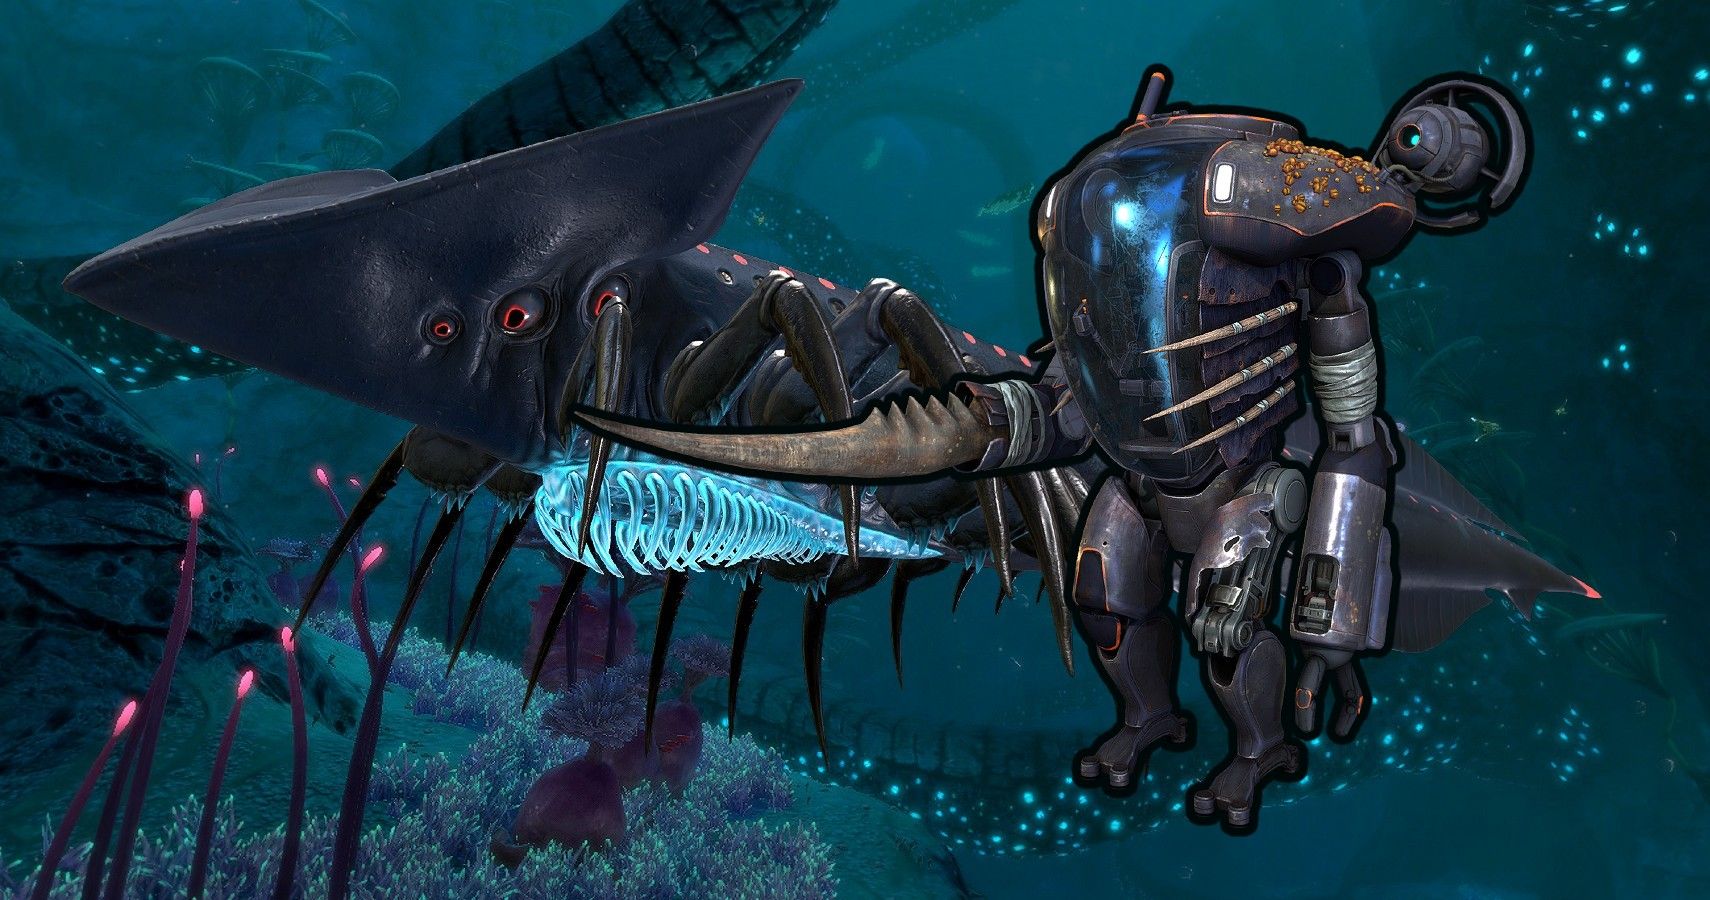 prawn suit and leviathan in below zero